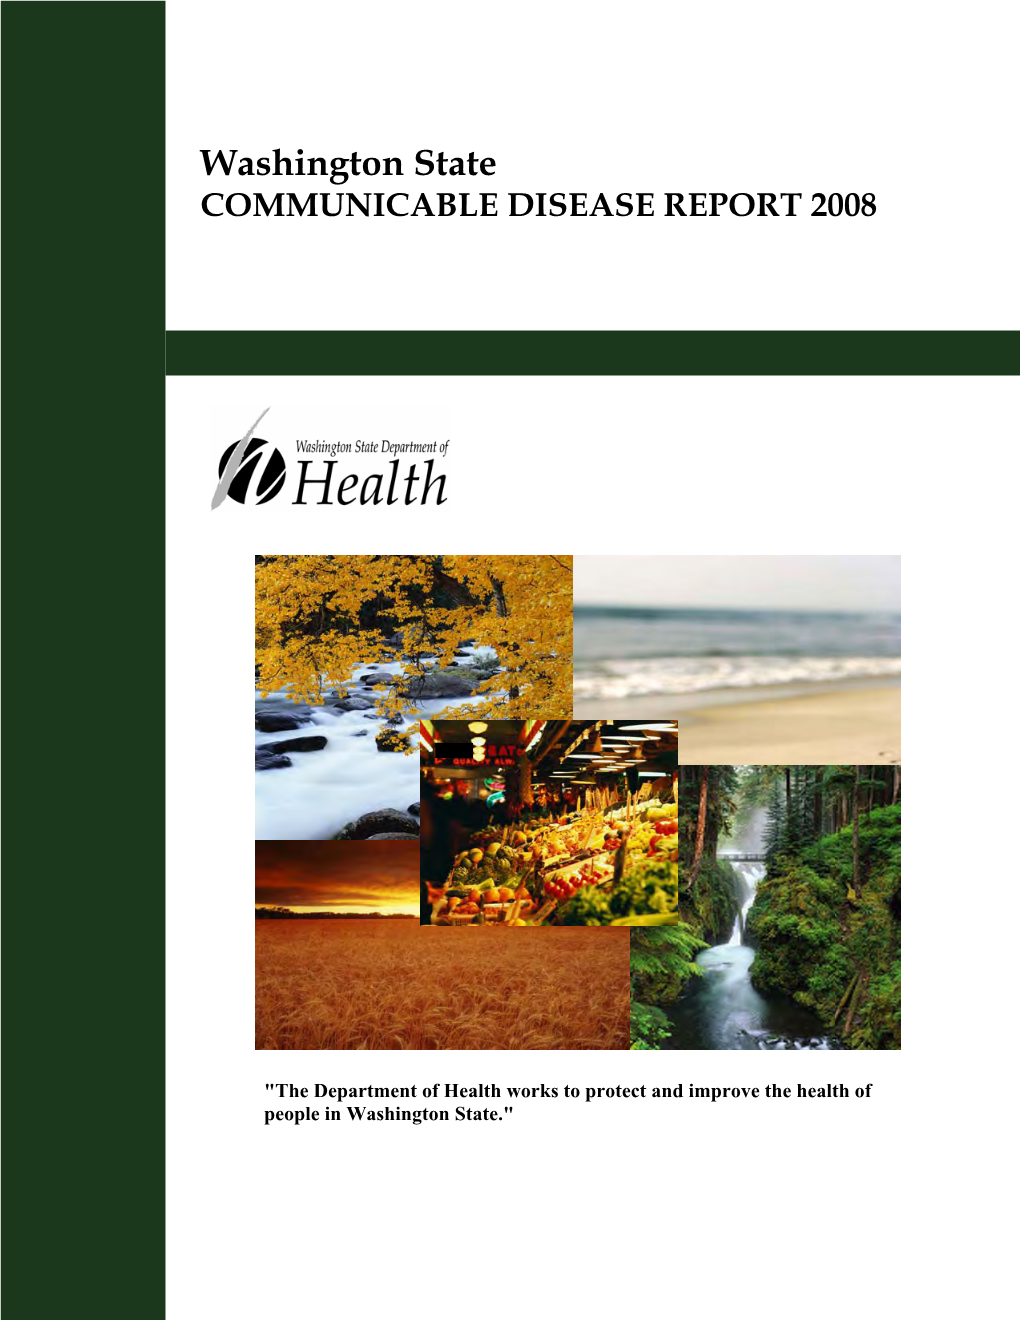 Washington State Annual Communicable Disease Report 2008